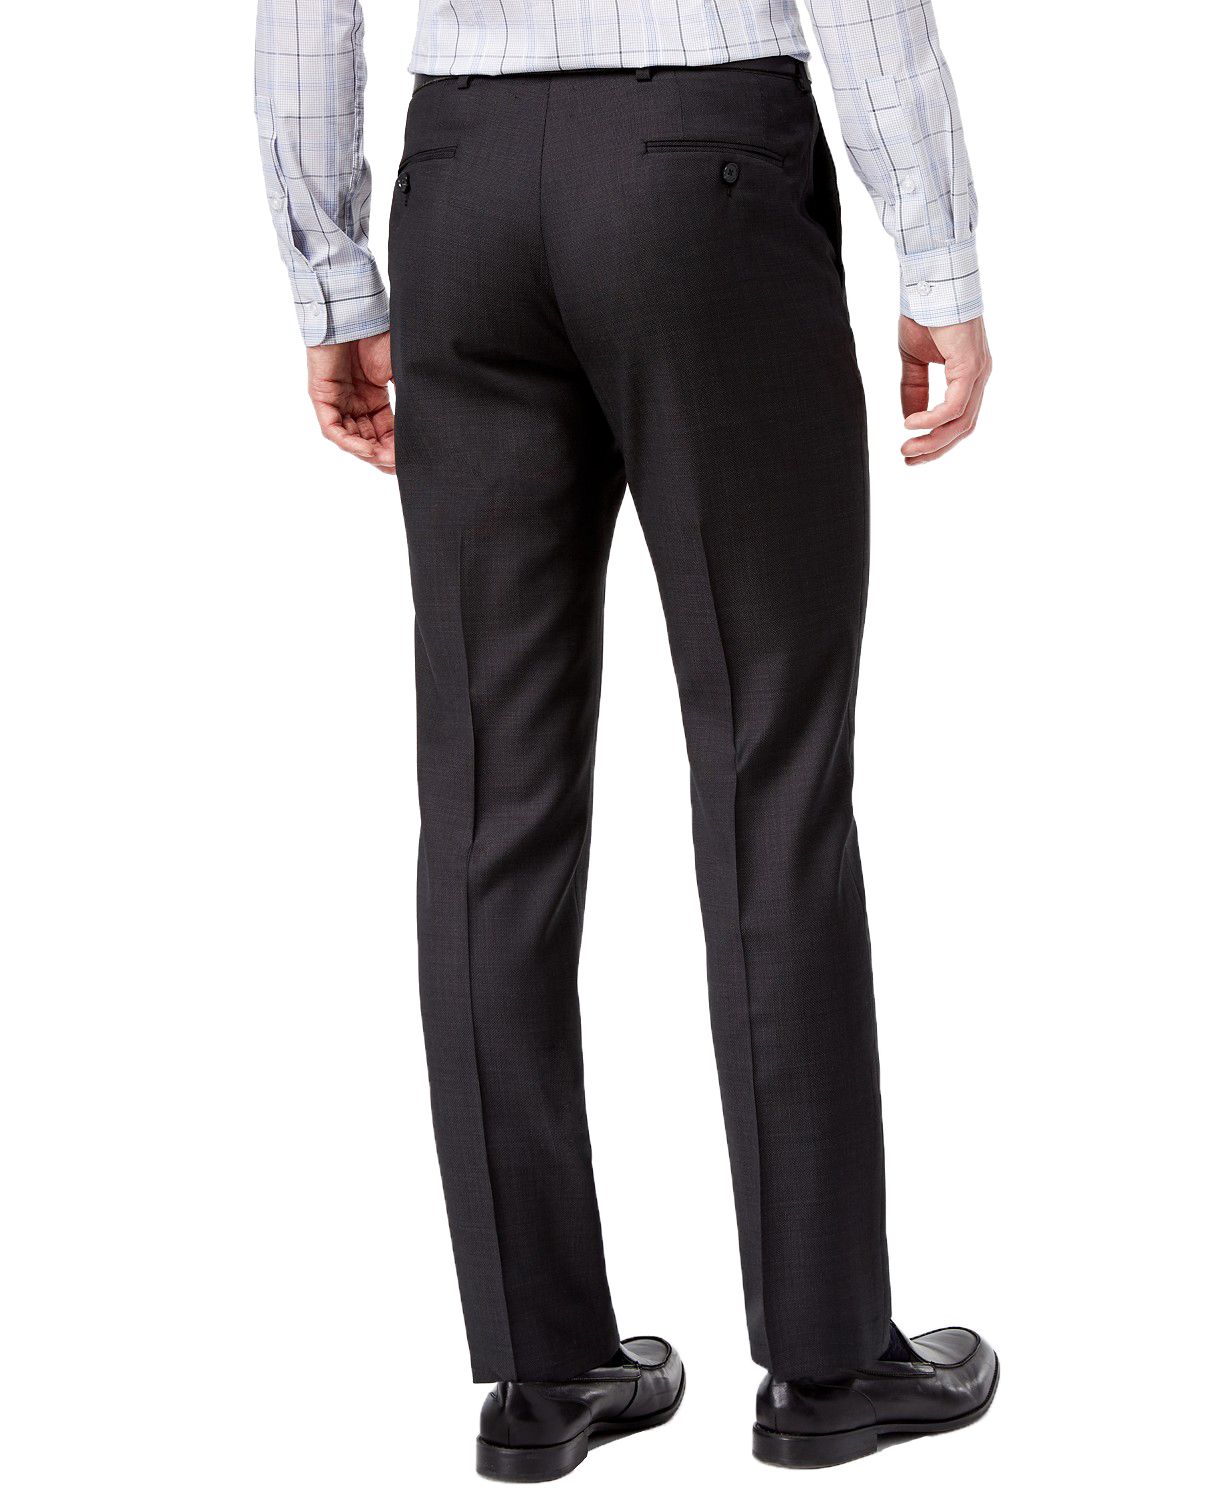 www.couturepoint.com-dkny-mens-black-wool-modern-fit-stretch-textured-suit-pants